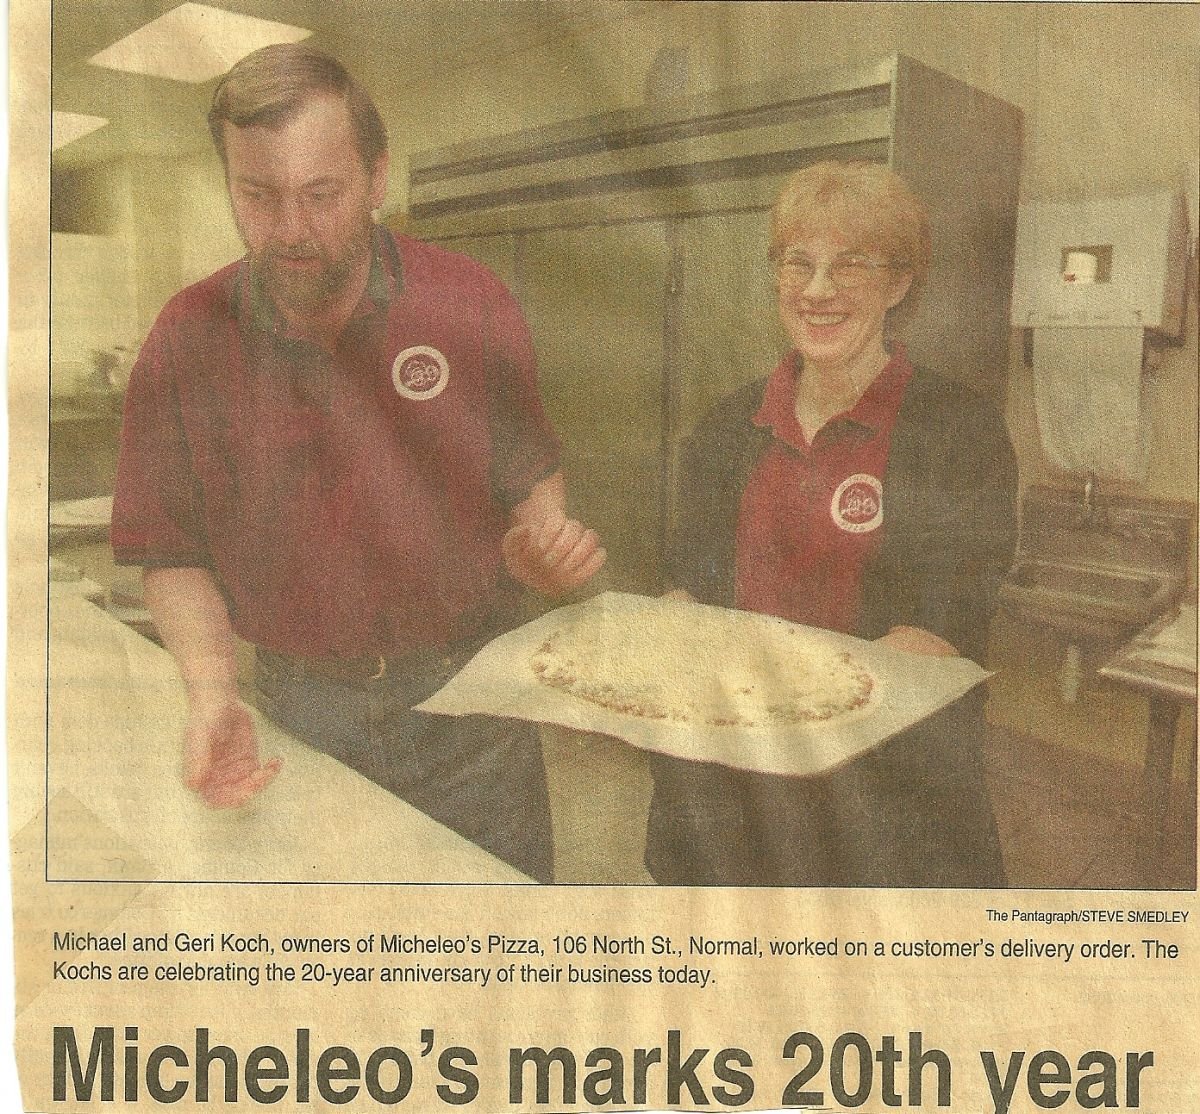 Mike & Geri Koch, owners of Micheleo's Pizza, working on a customer's delivery order.